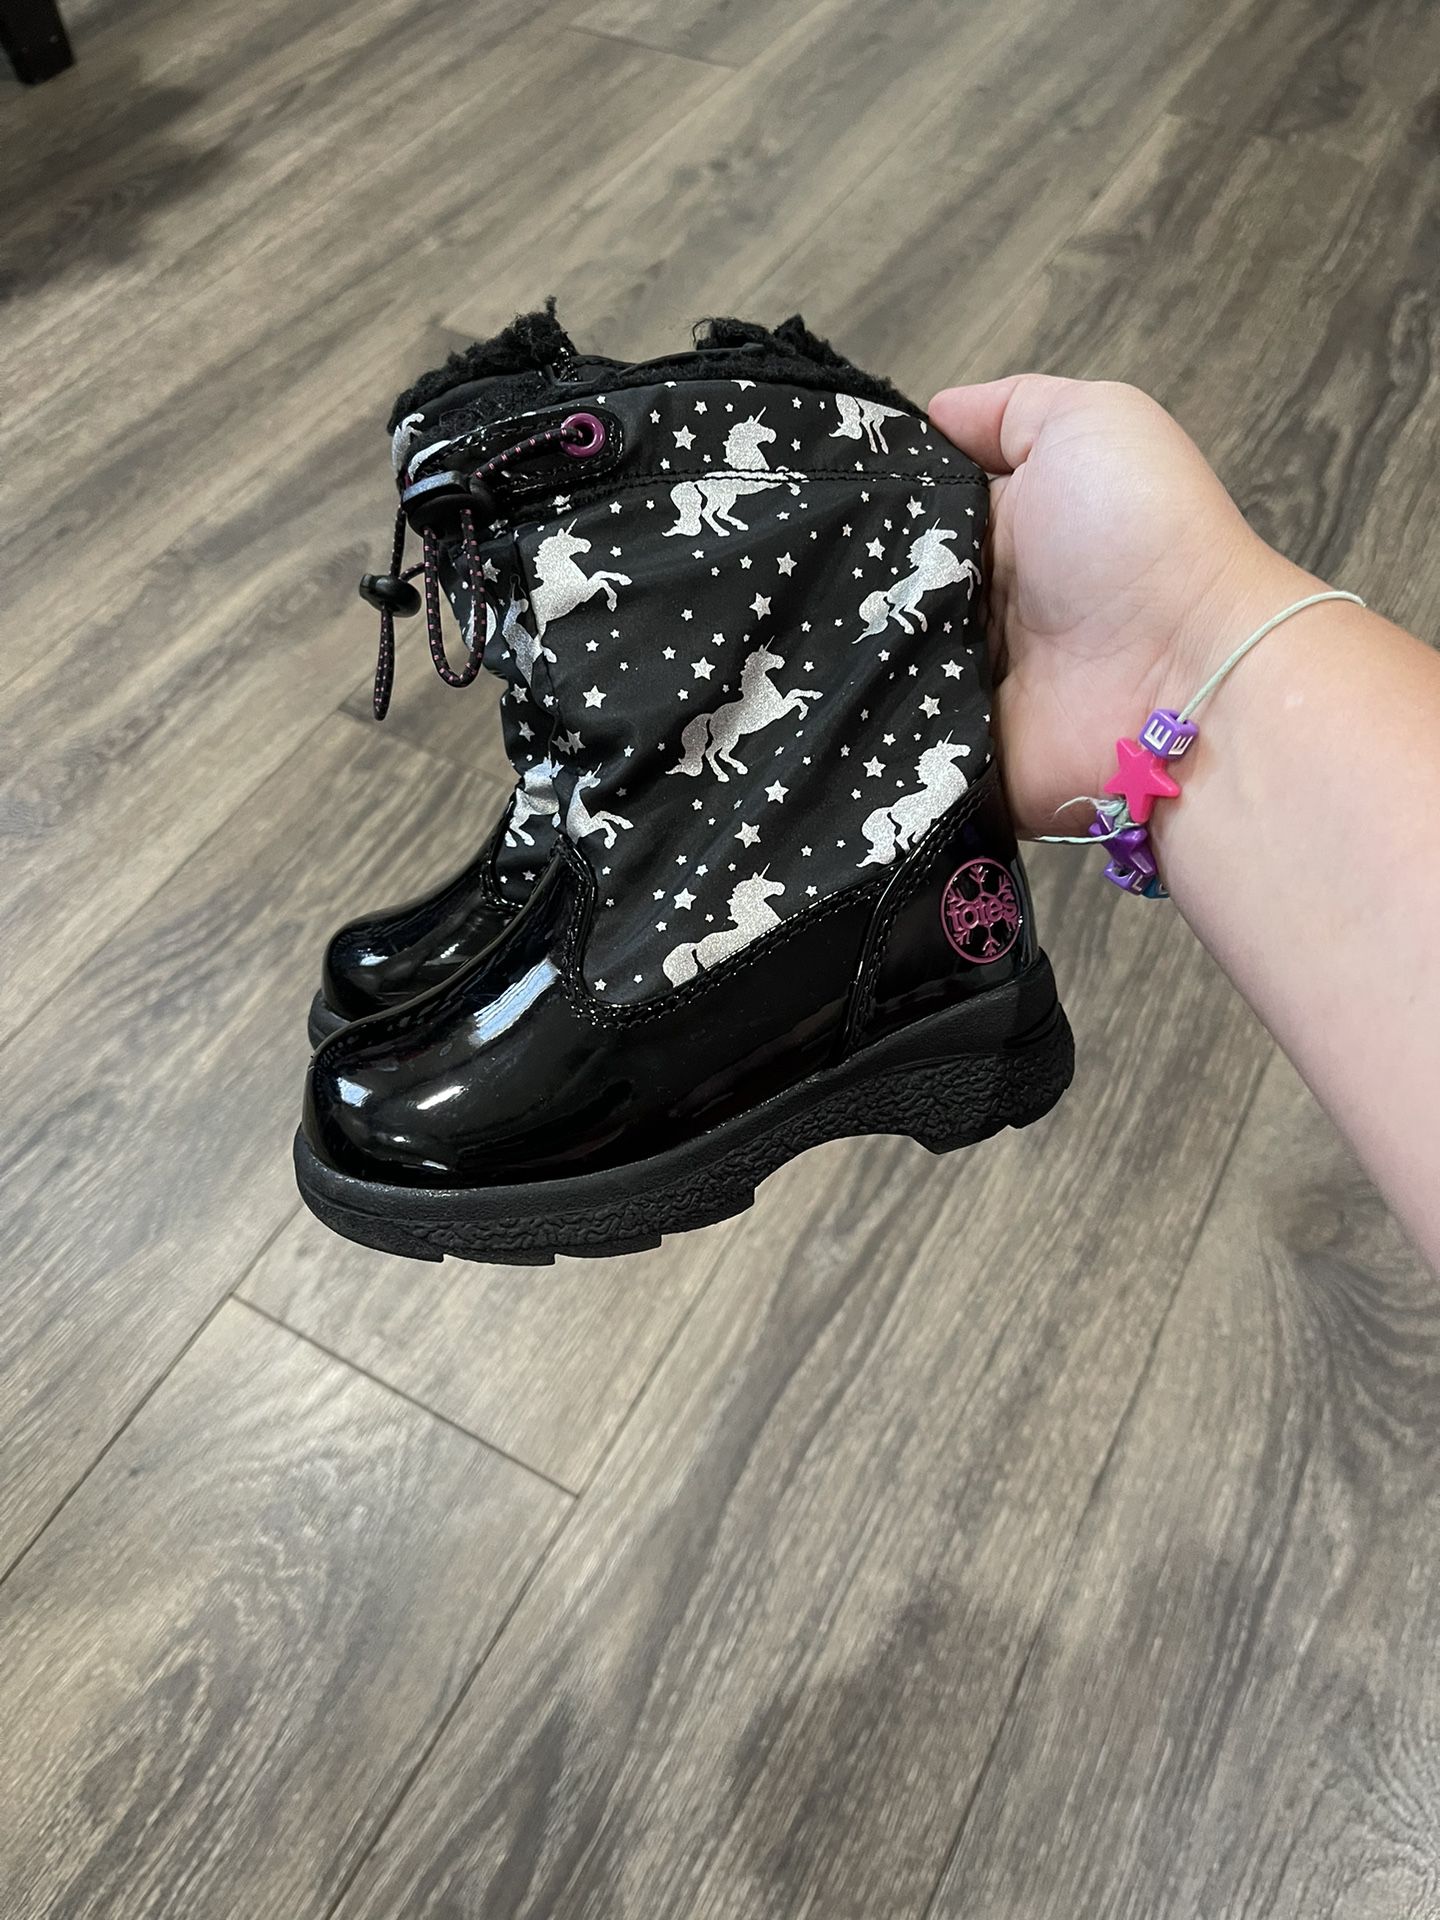 Toddler Size 7 Snow Boots